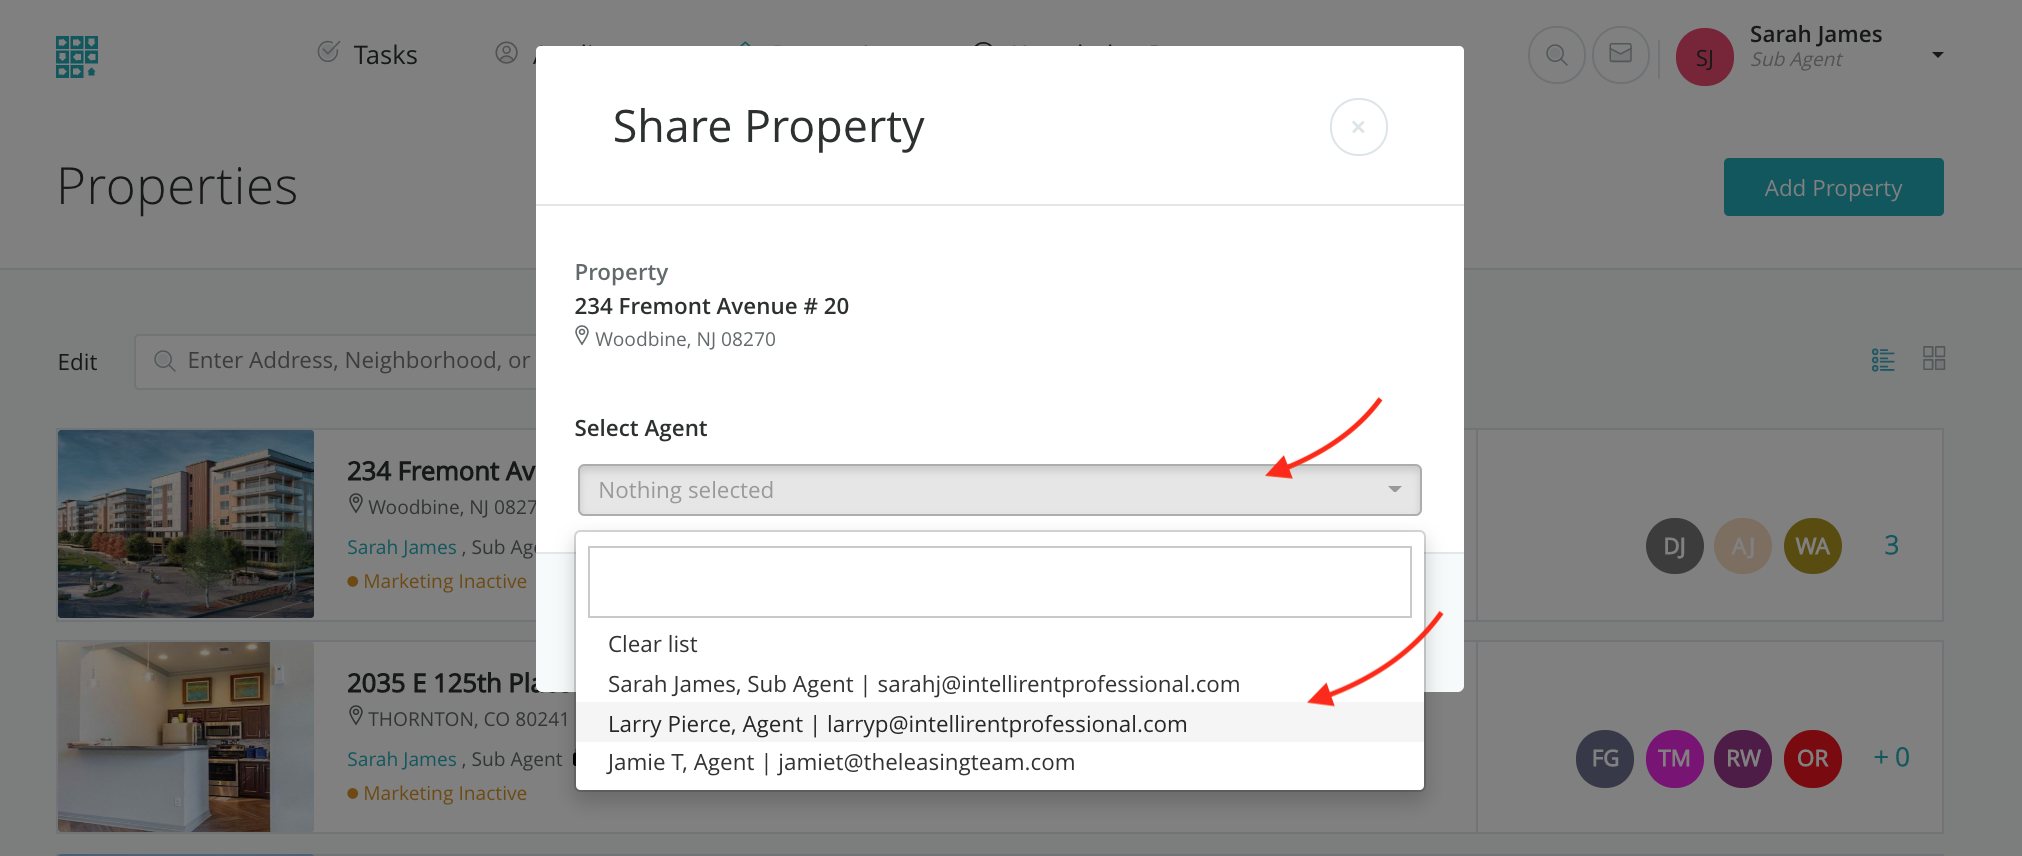 Share_Property_select_agent.png